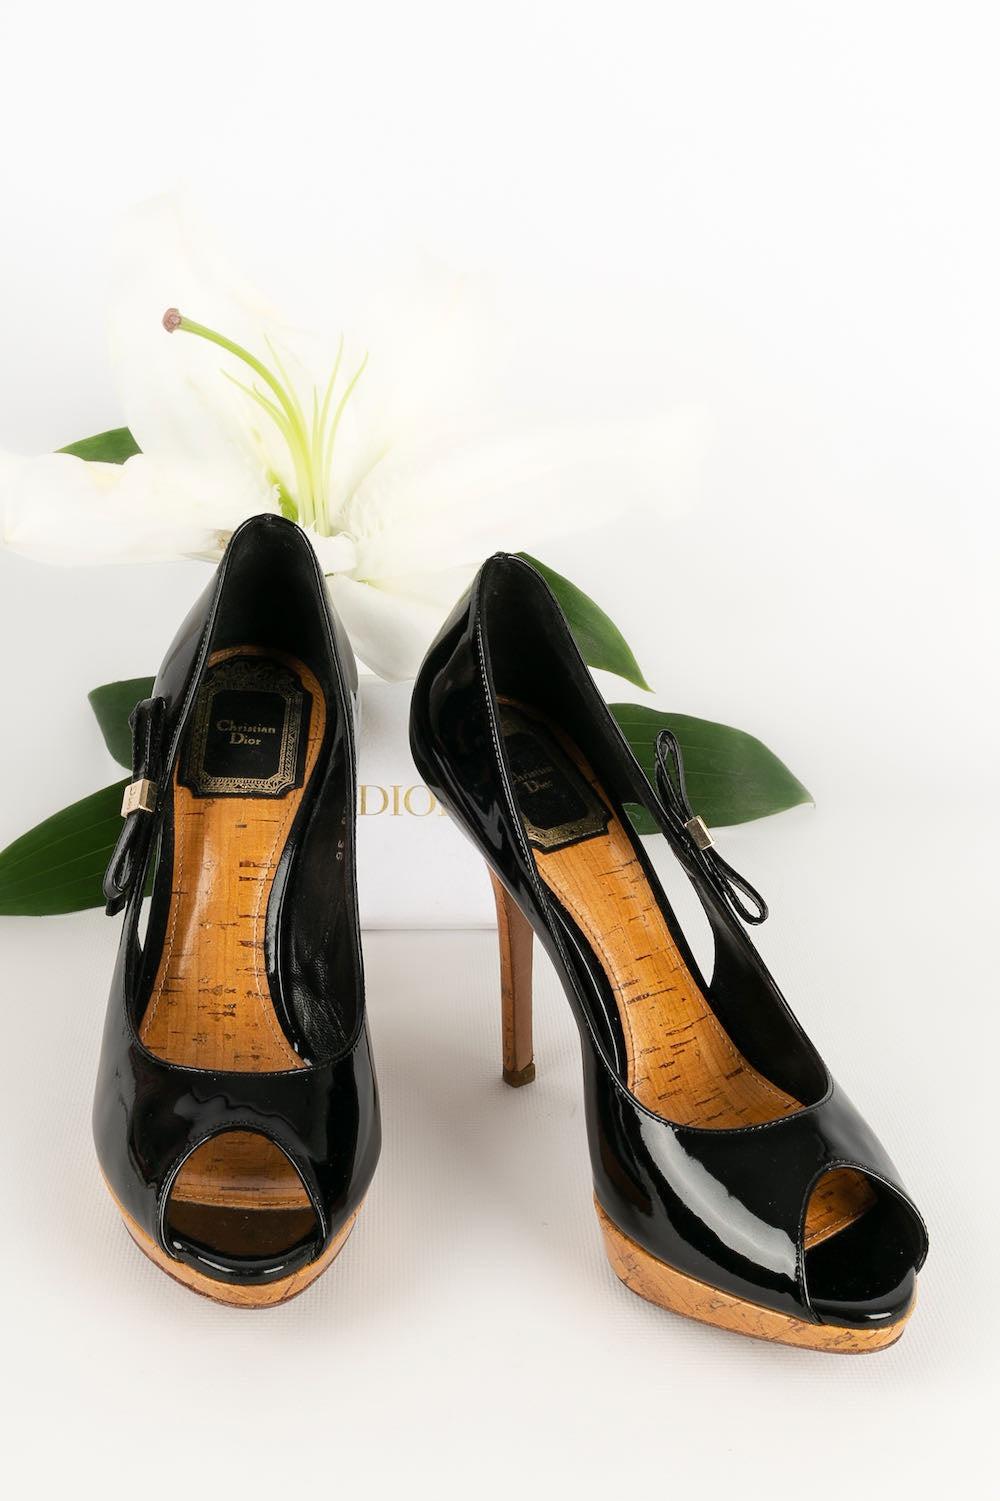 Dior Shoes in Patent Leather Pumps For Sale 5